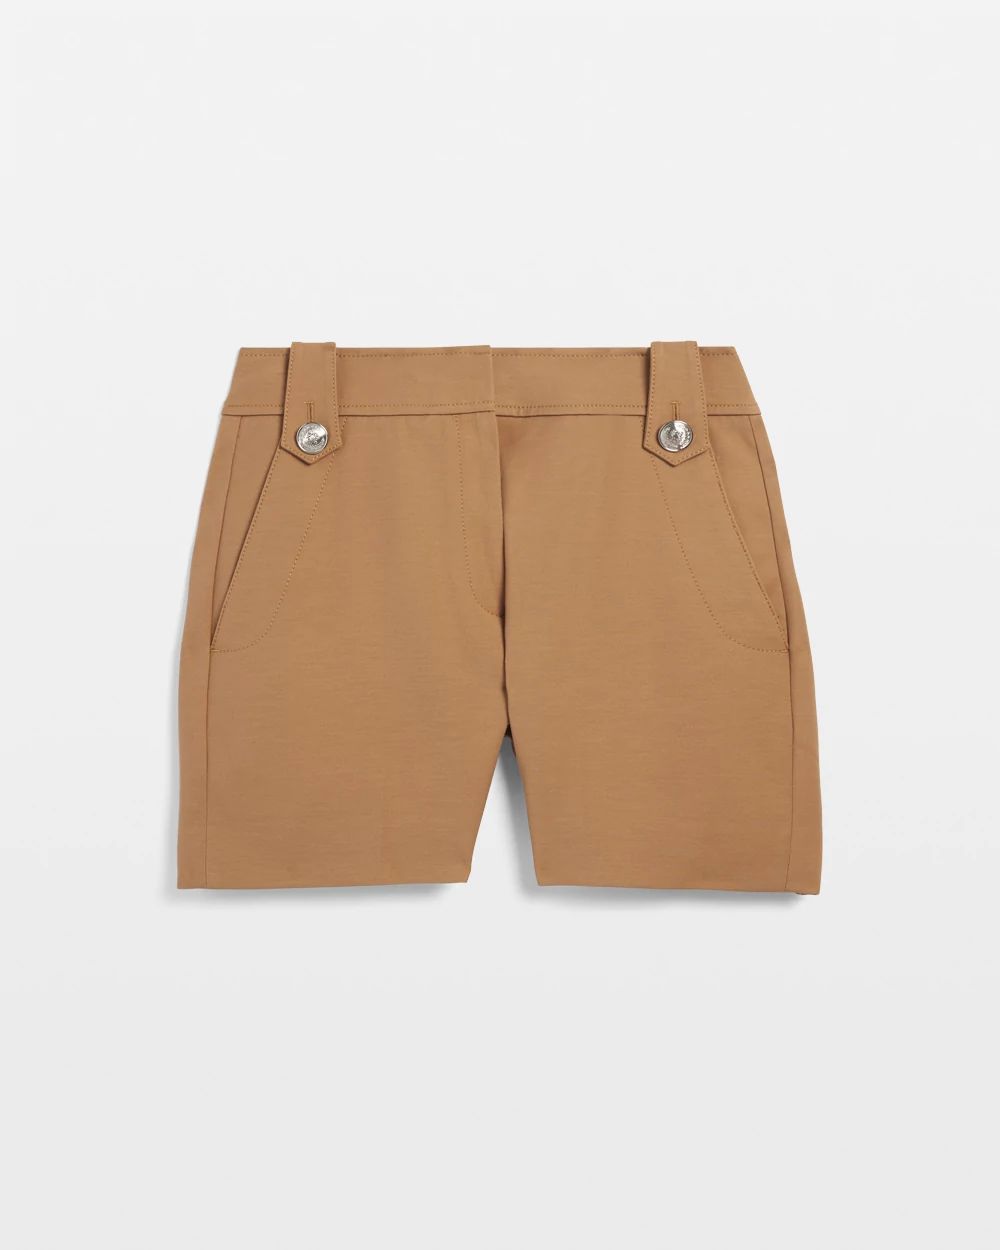 High-Rise Lightweight Button Comfort Stretch Shorts click to view larger image.